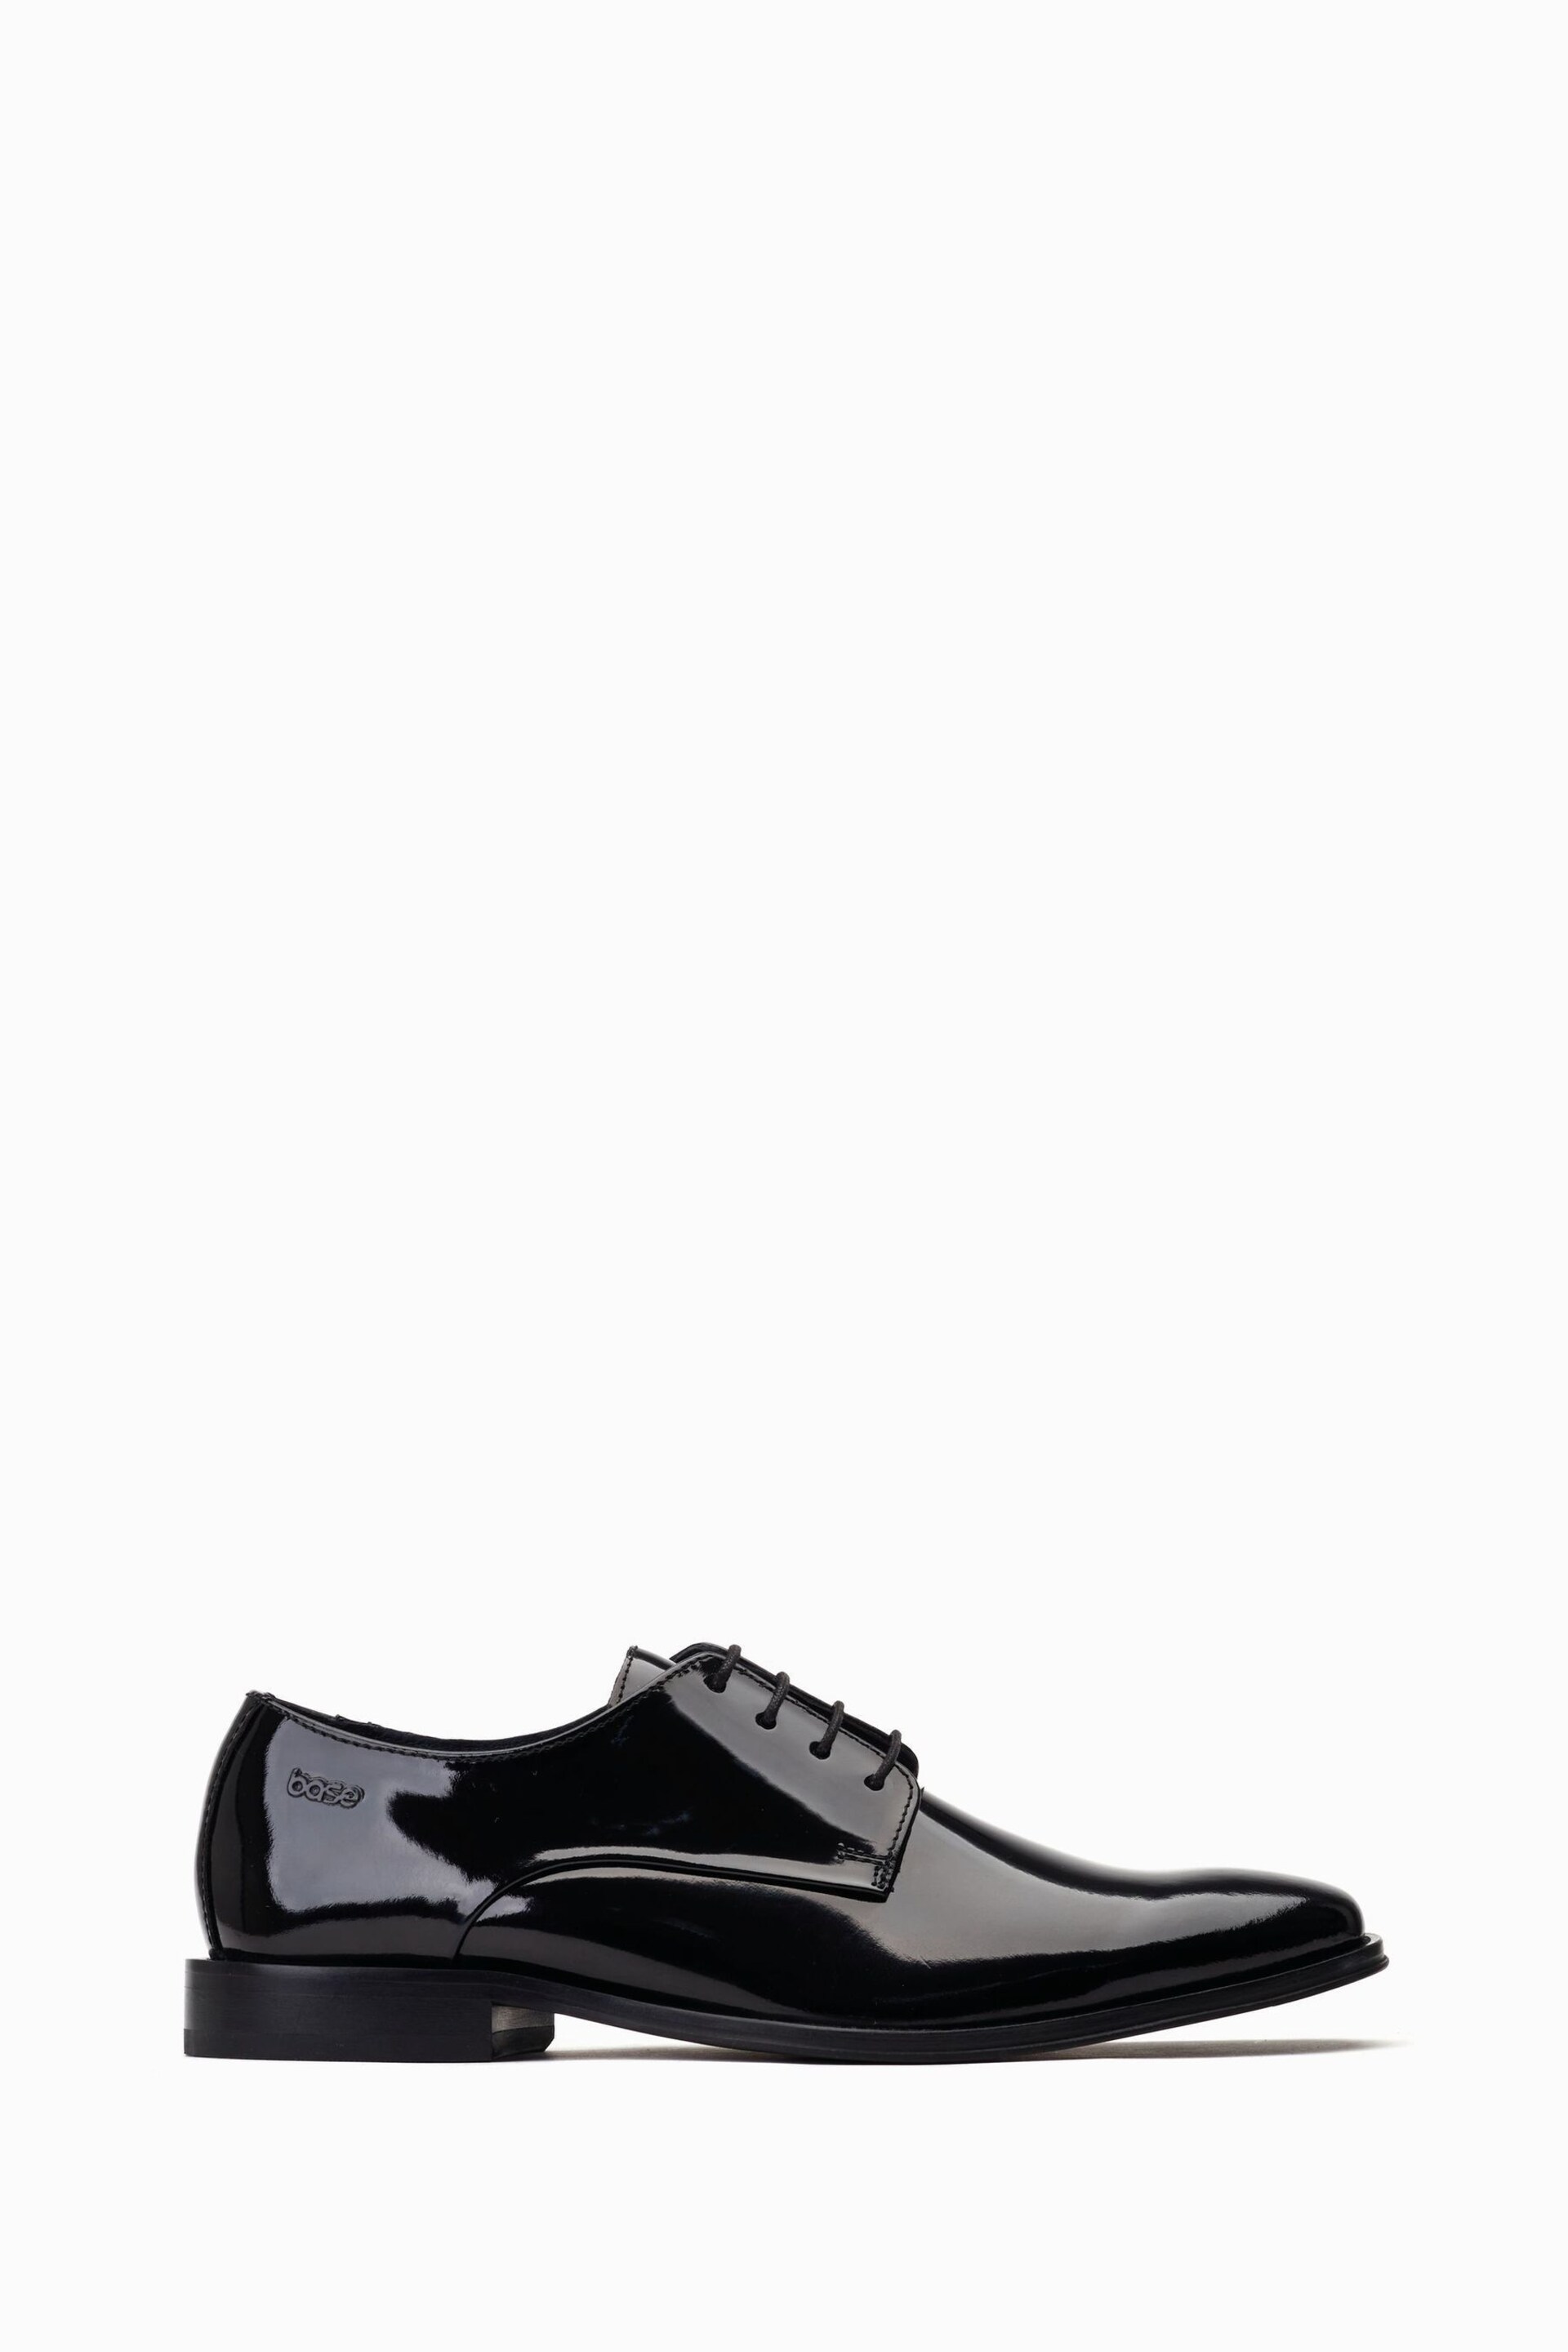 Base London Marley Derby Shoes - Image 1 of 6